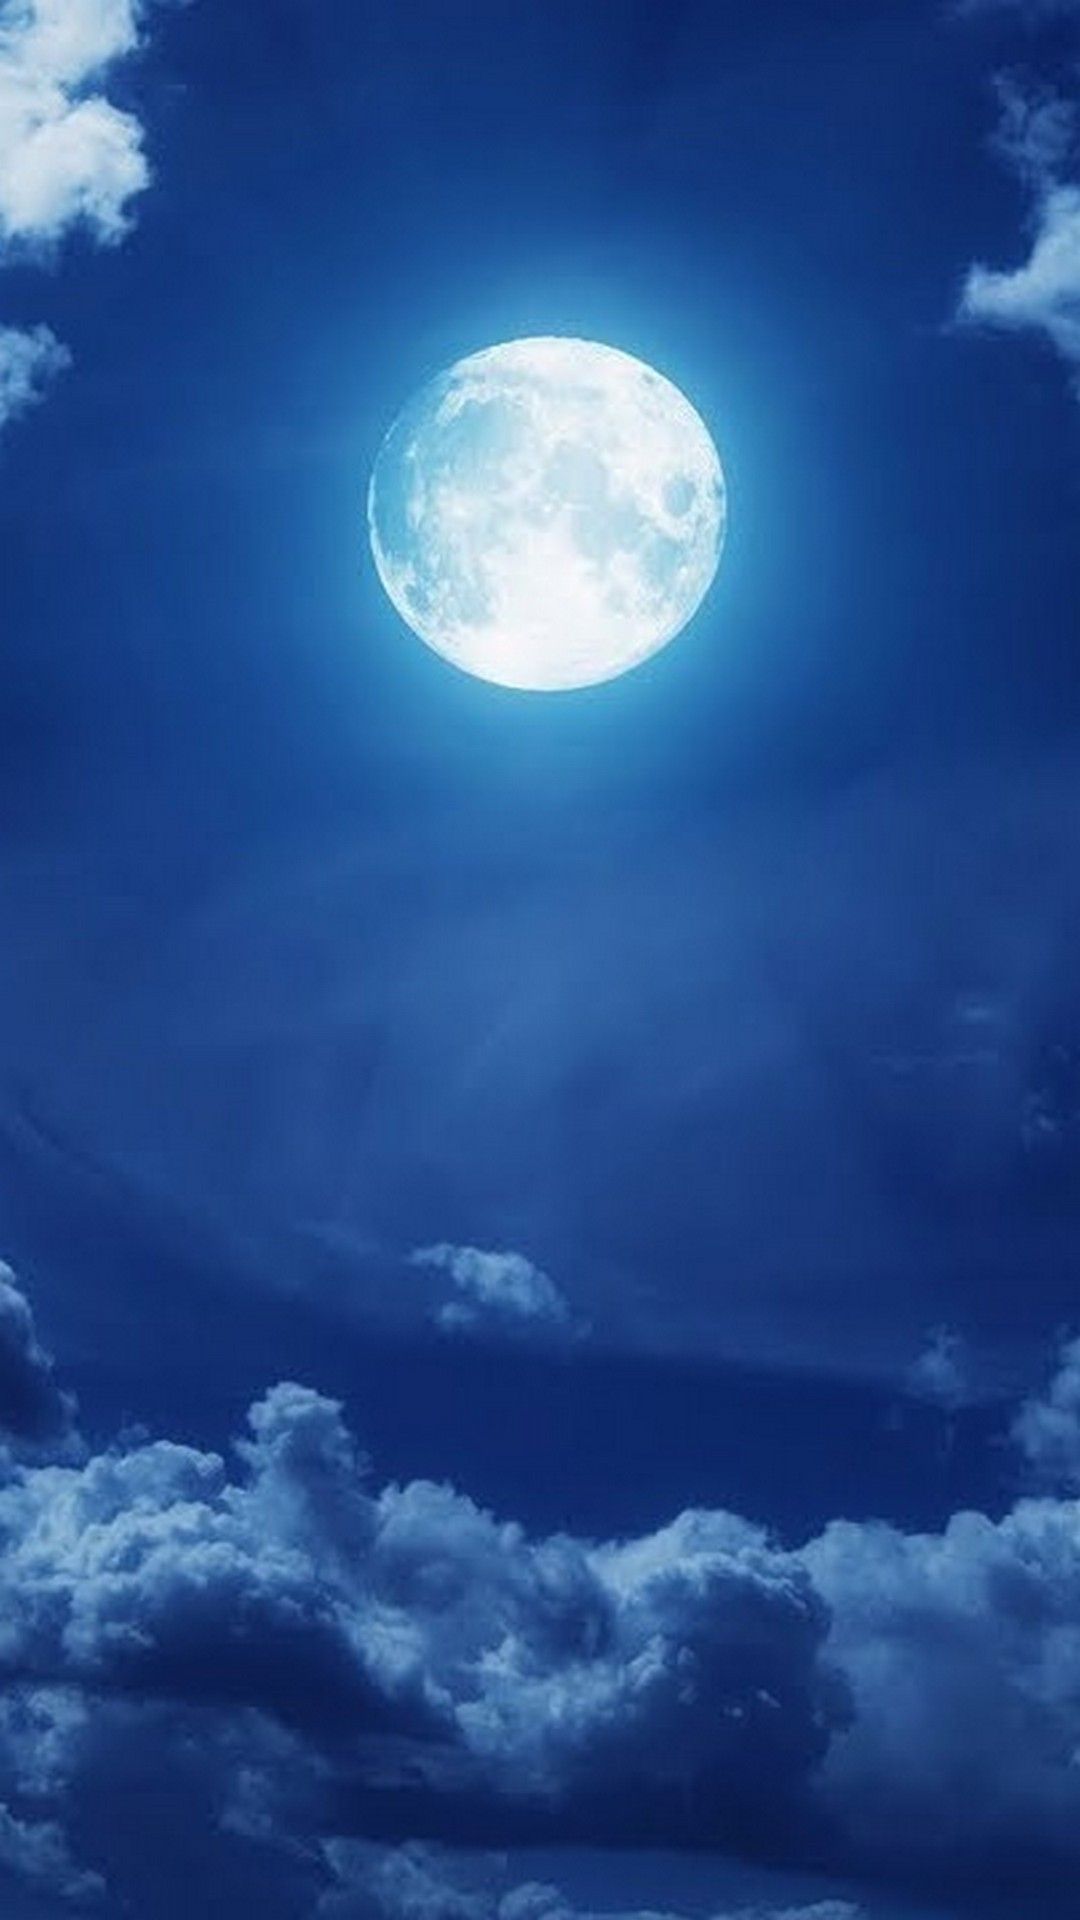 Super Blue Blood Moon Wallpaper Android   2019 Android